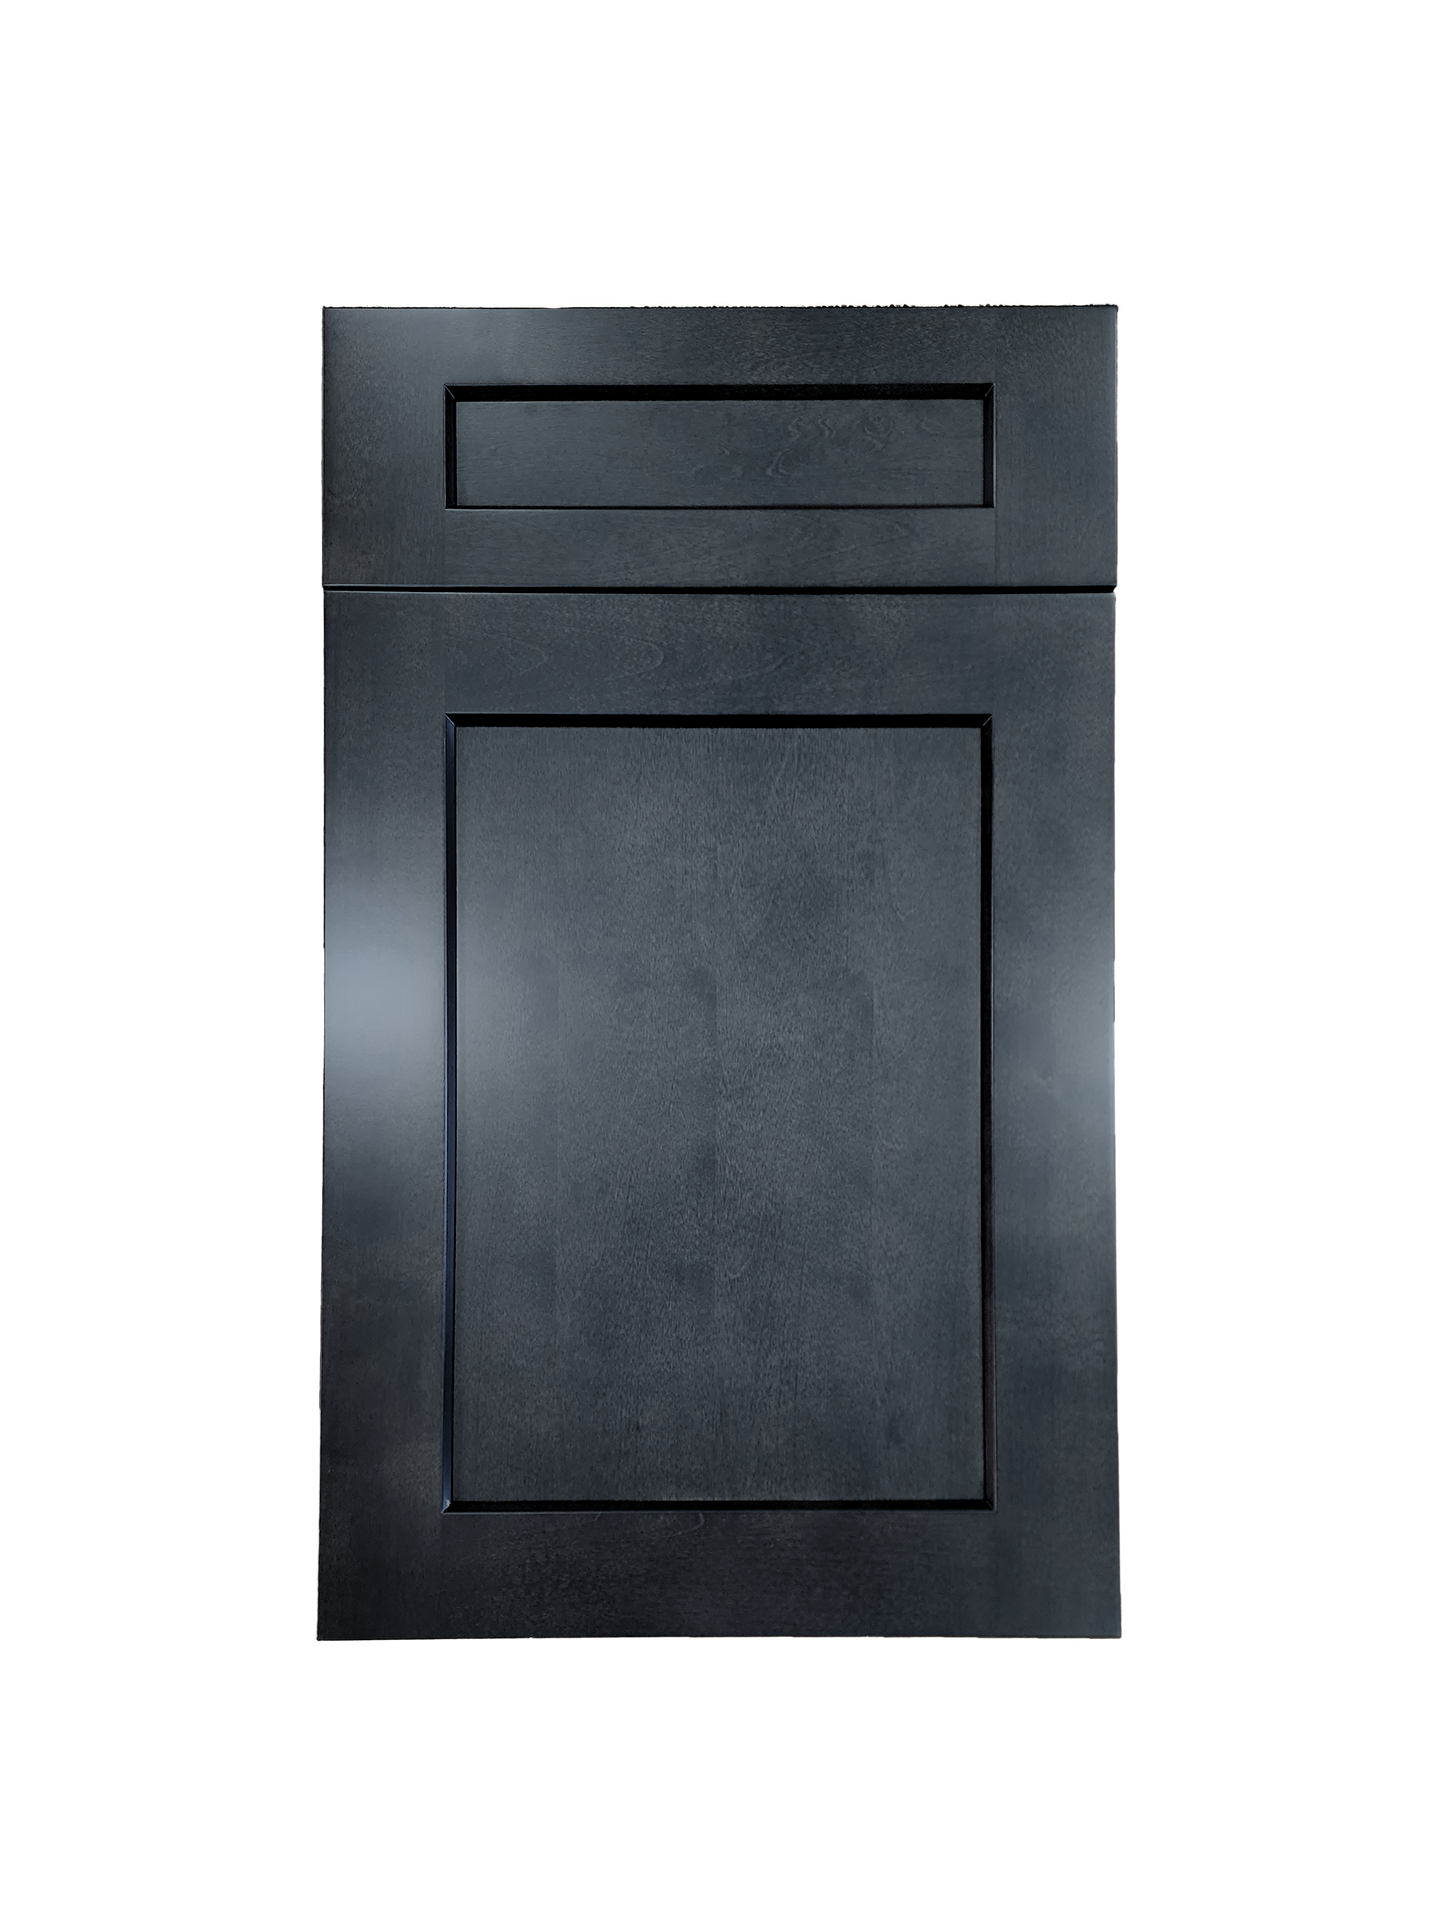 Stormy Grey Pantry Cabinet 18 inches wide 24 inches deep 90 inches tall with Stormy Grey box and Stormy Grey doors